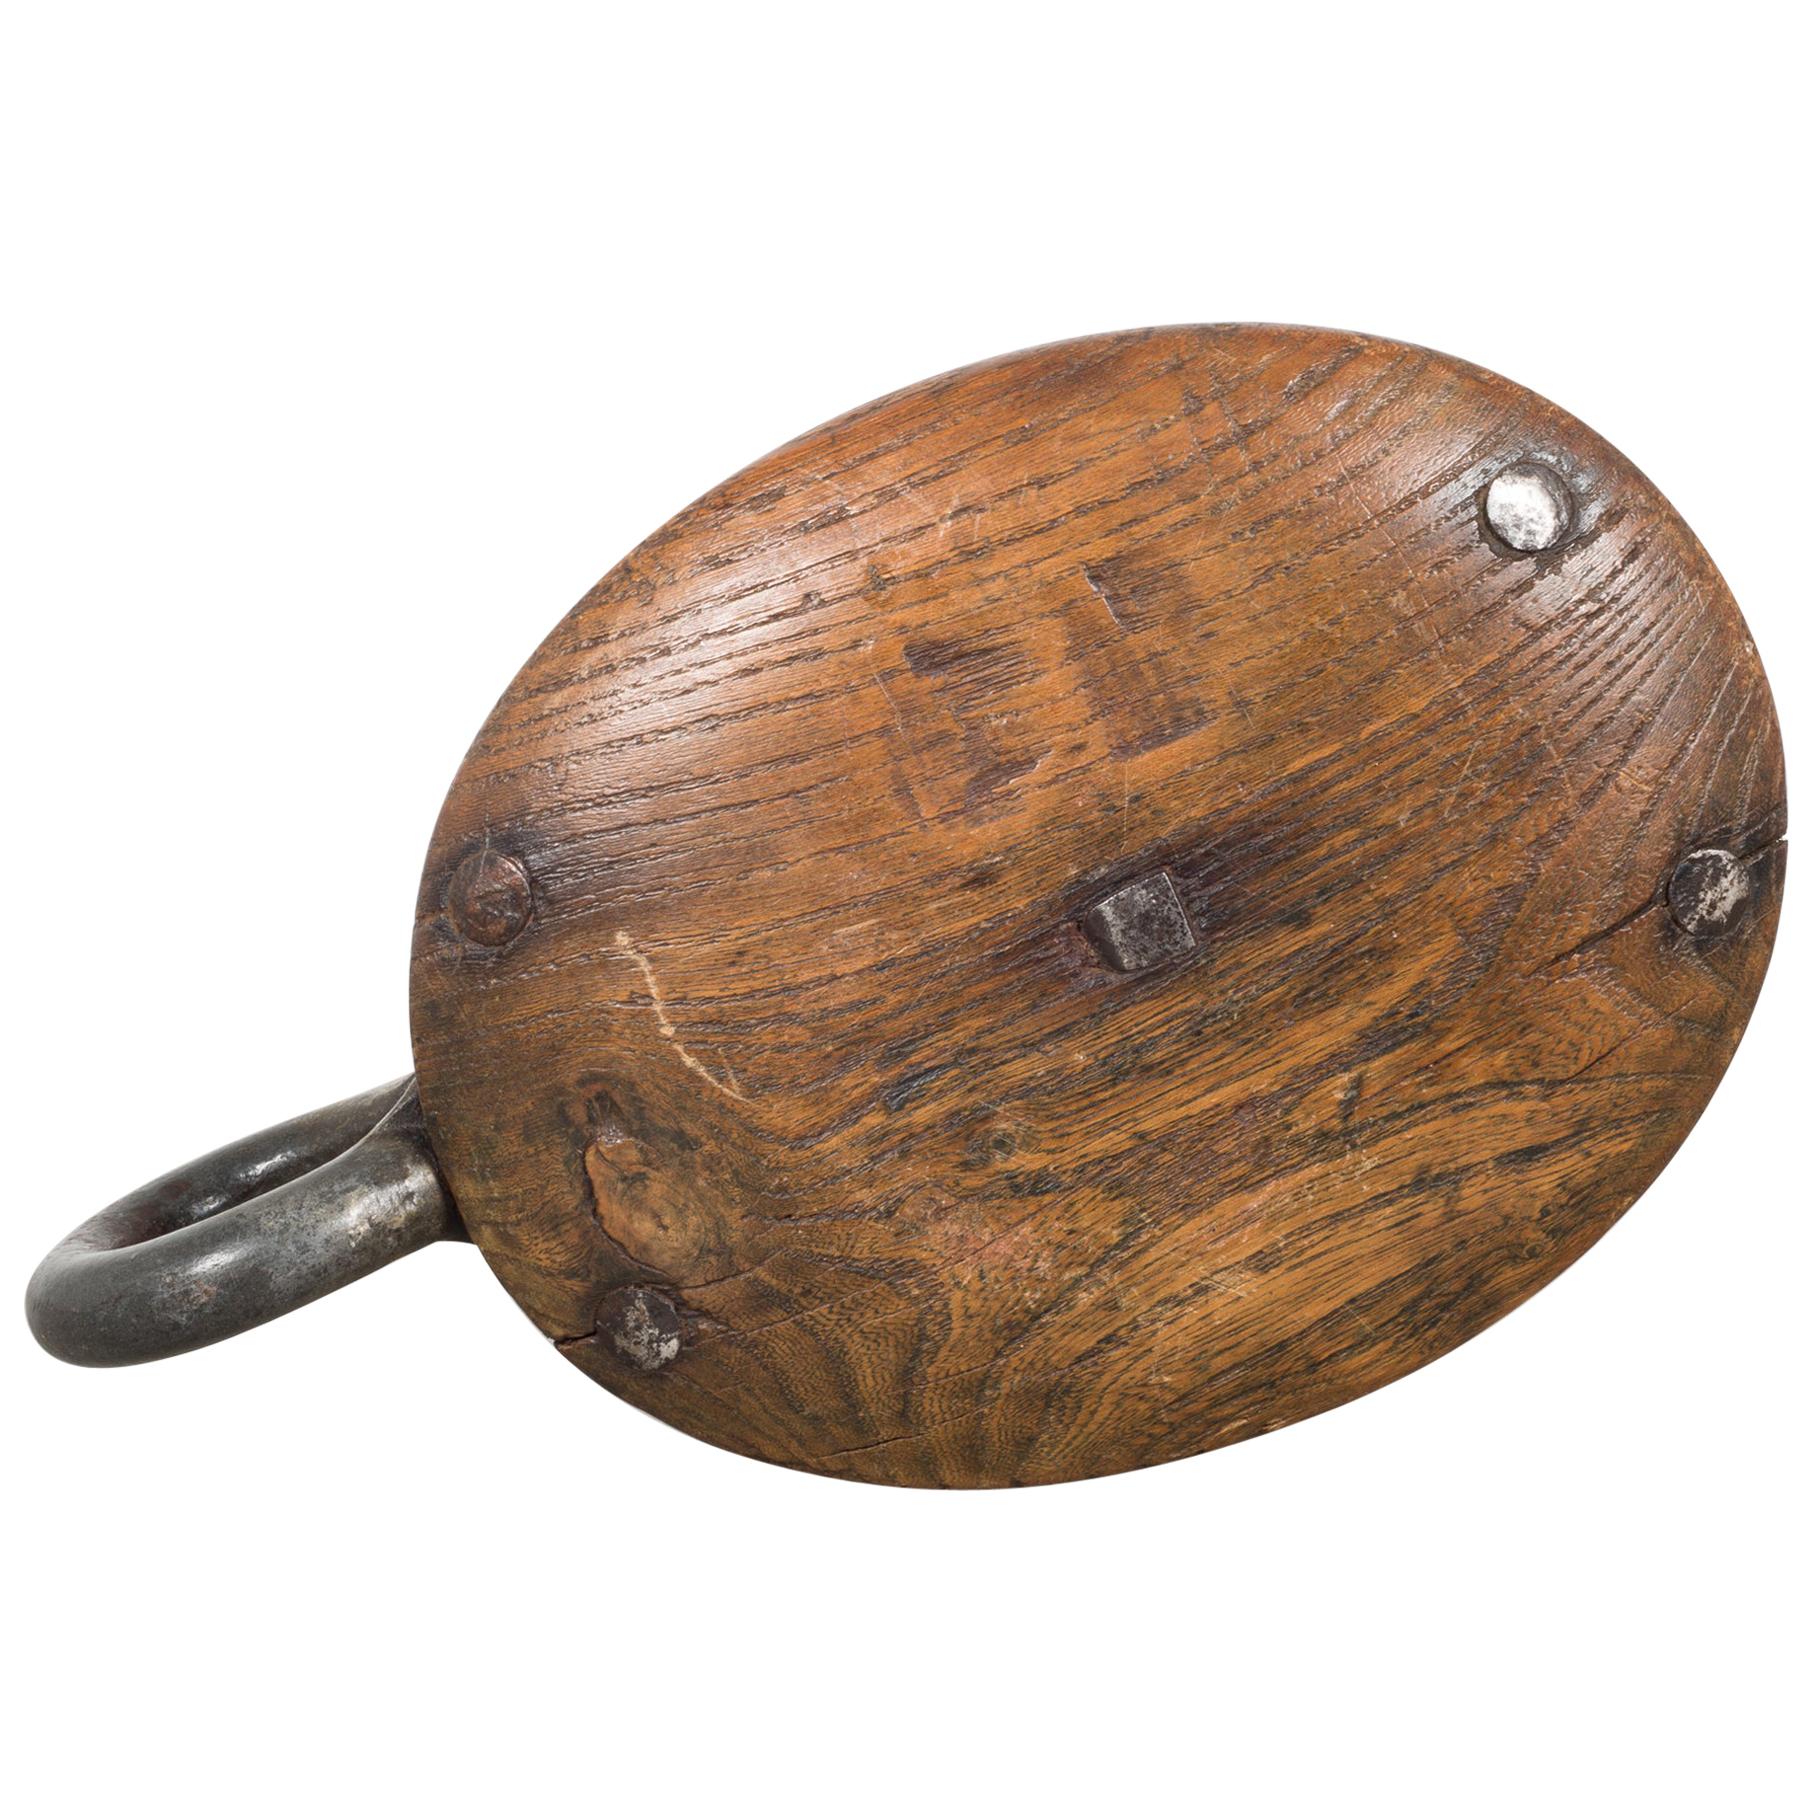 Antique 19th Century Wooden Block and Tackle, circa 1800s